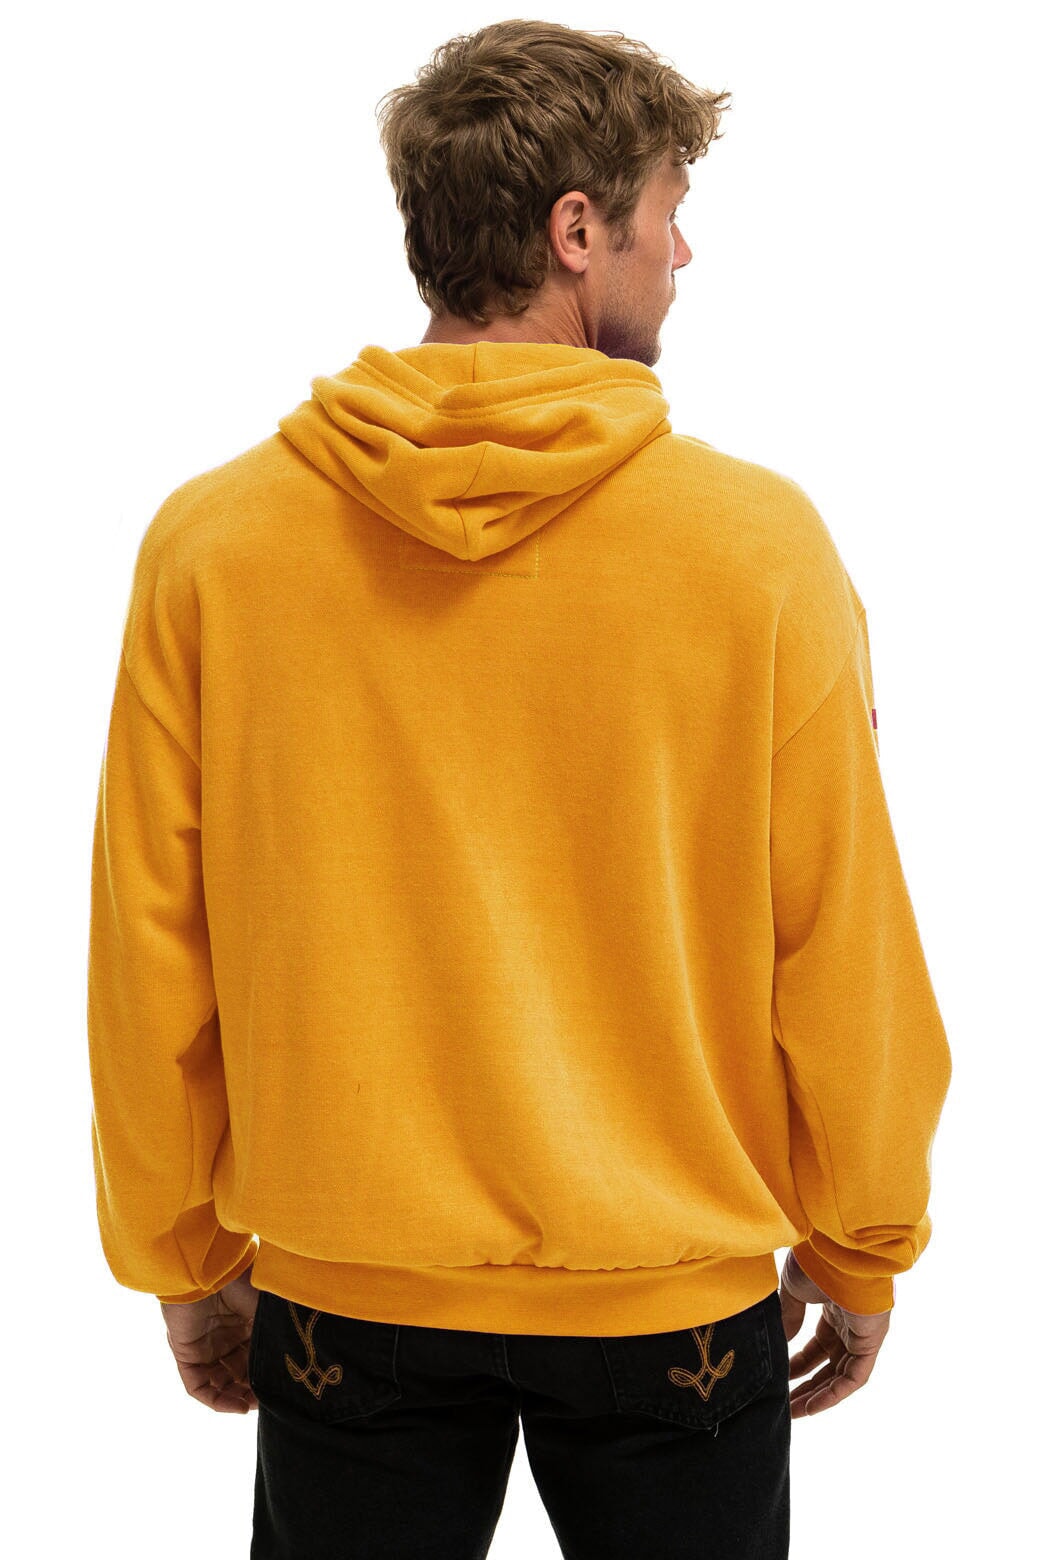 AVIATOR NATION ASPEN RELAXED PULLOVER HOODIE - GOLD Hoodie Aviator Nation 